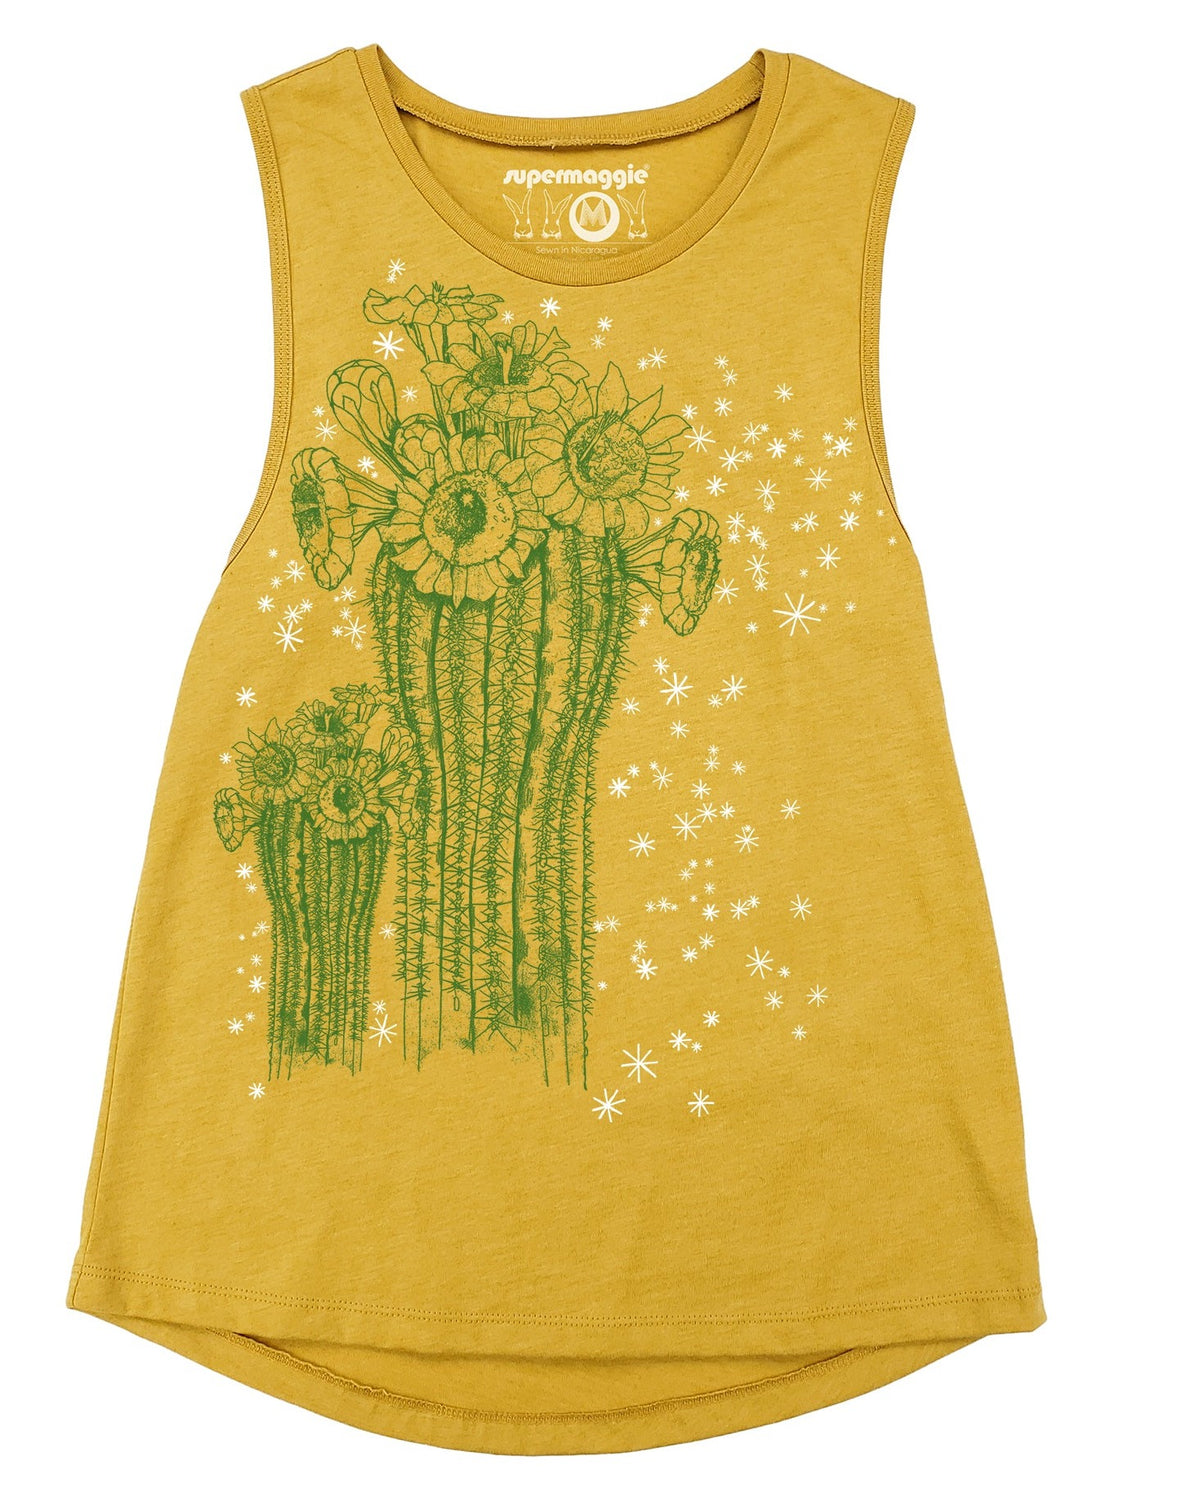 A mustard yellow muscle tank with saguaro cactus screenprinted in green ink. Stars are printed in white ink.